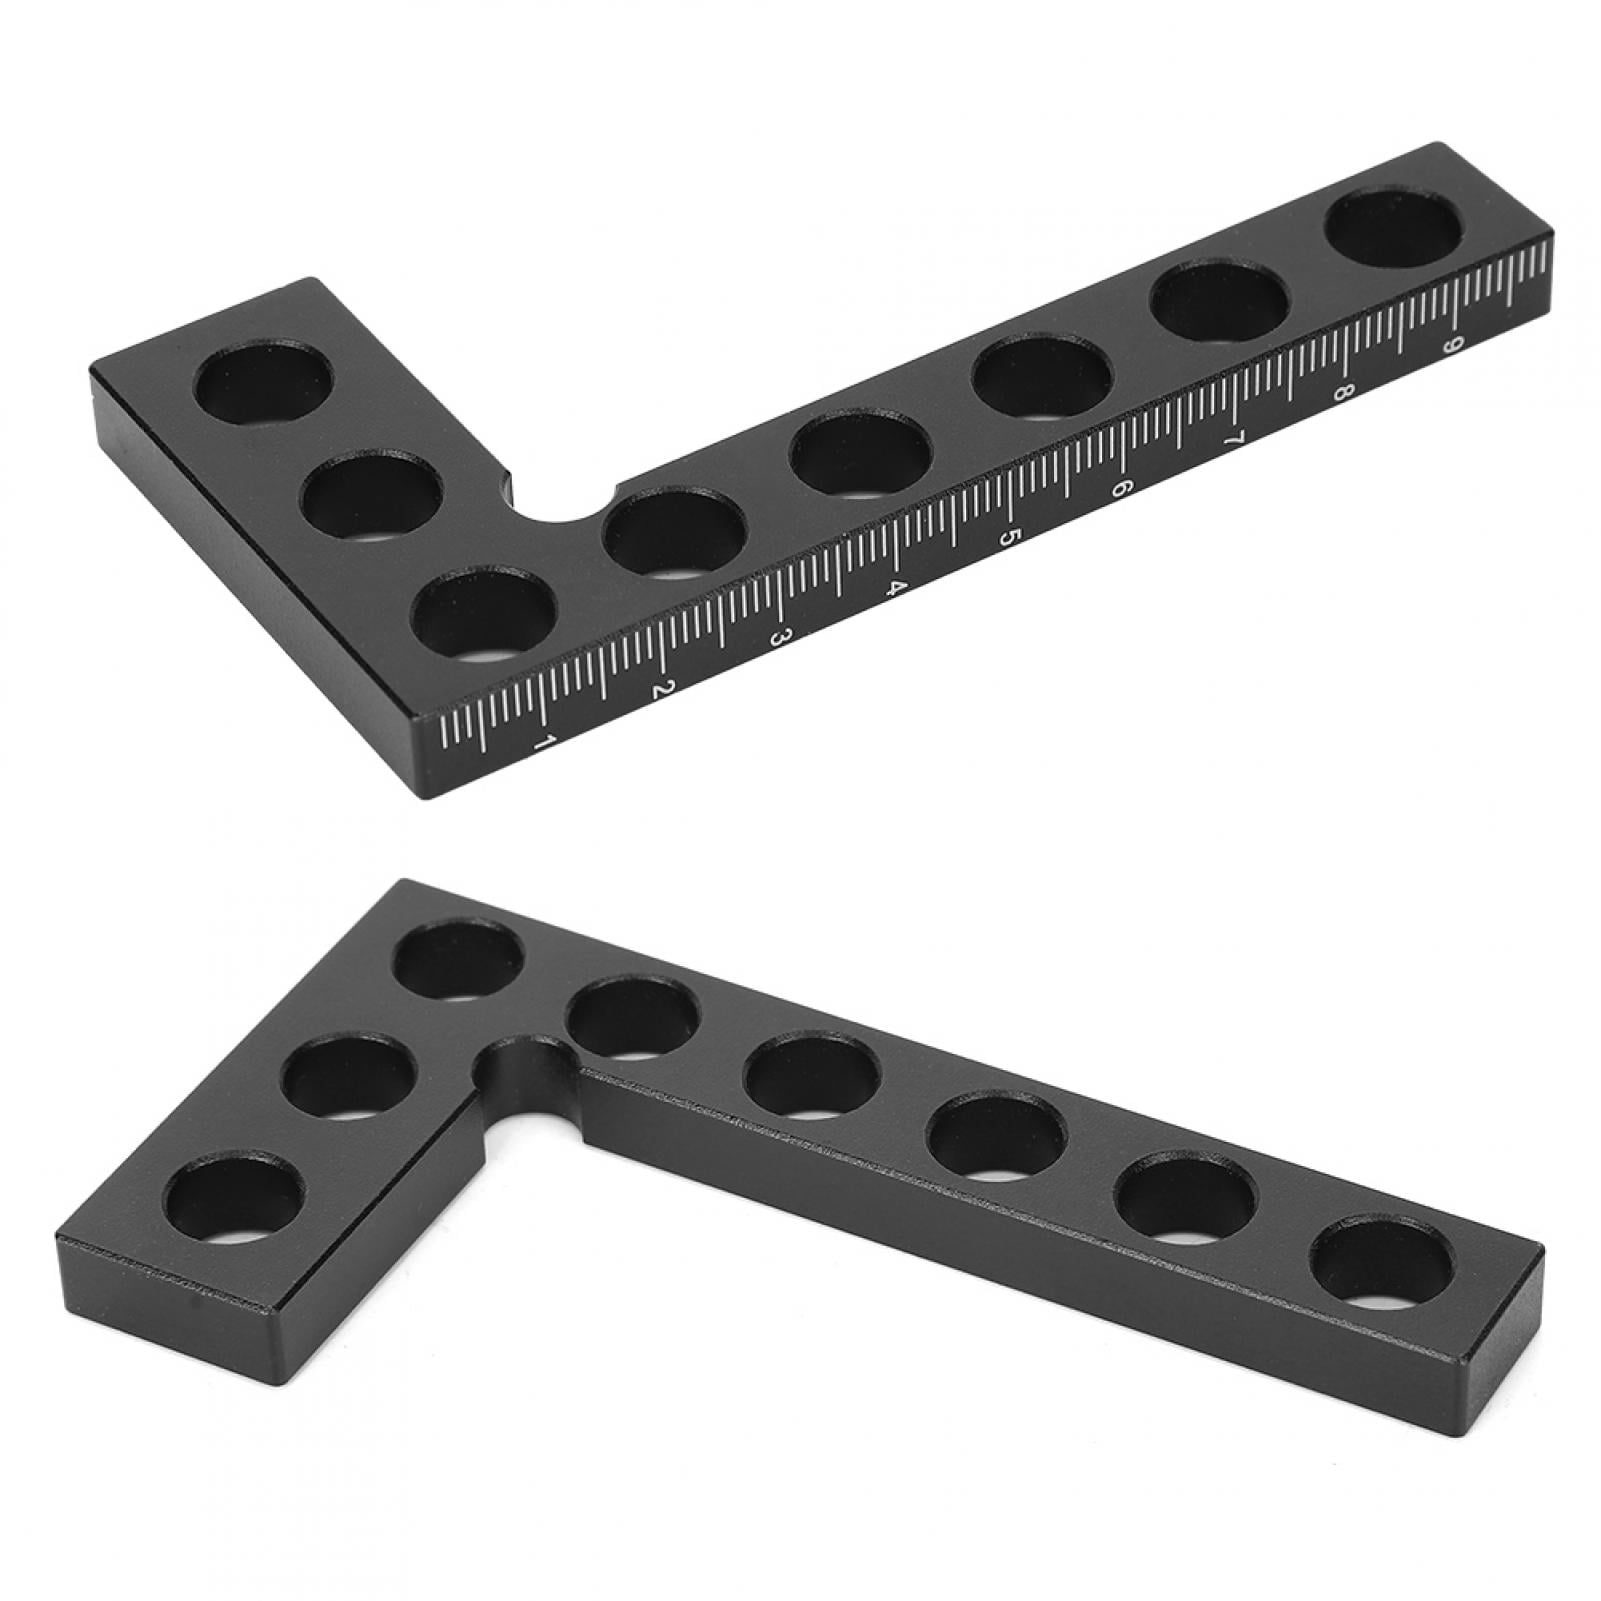 Metric Ruler 0-100mm Range 0.05mm Accuracy 90 Degree Angle Ruler Aluminum Alloy Woodworking Right Angle Positioning Squares 